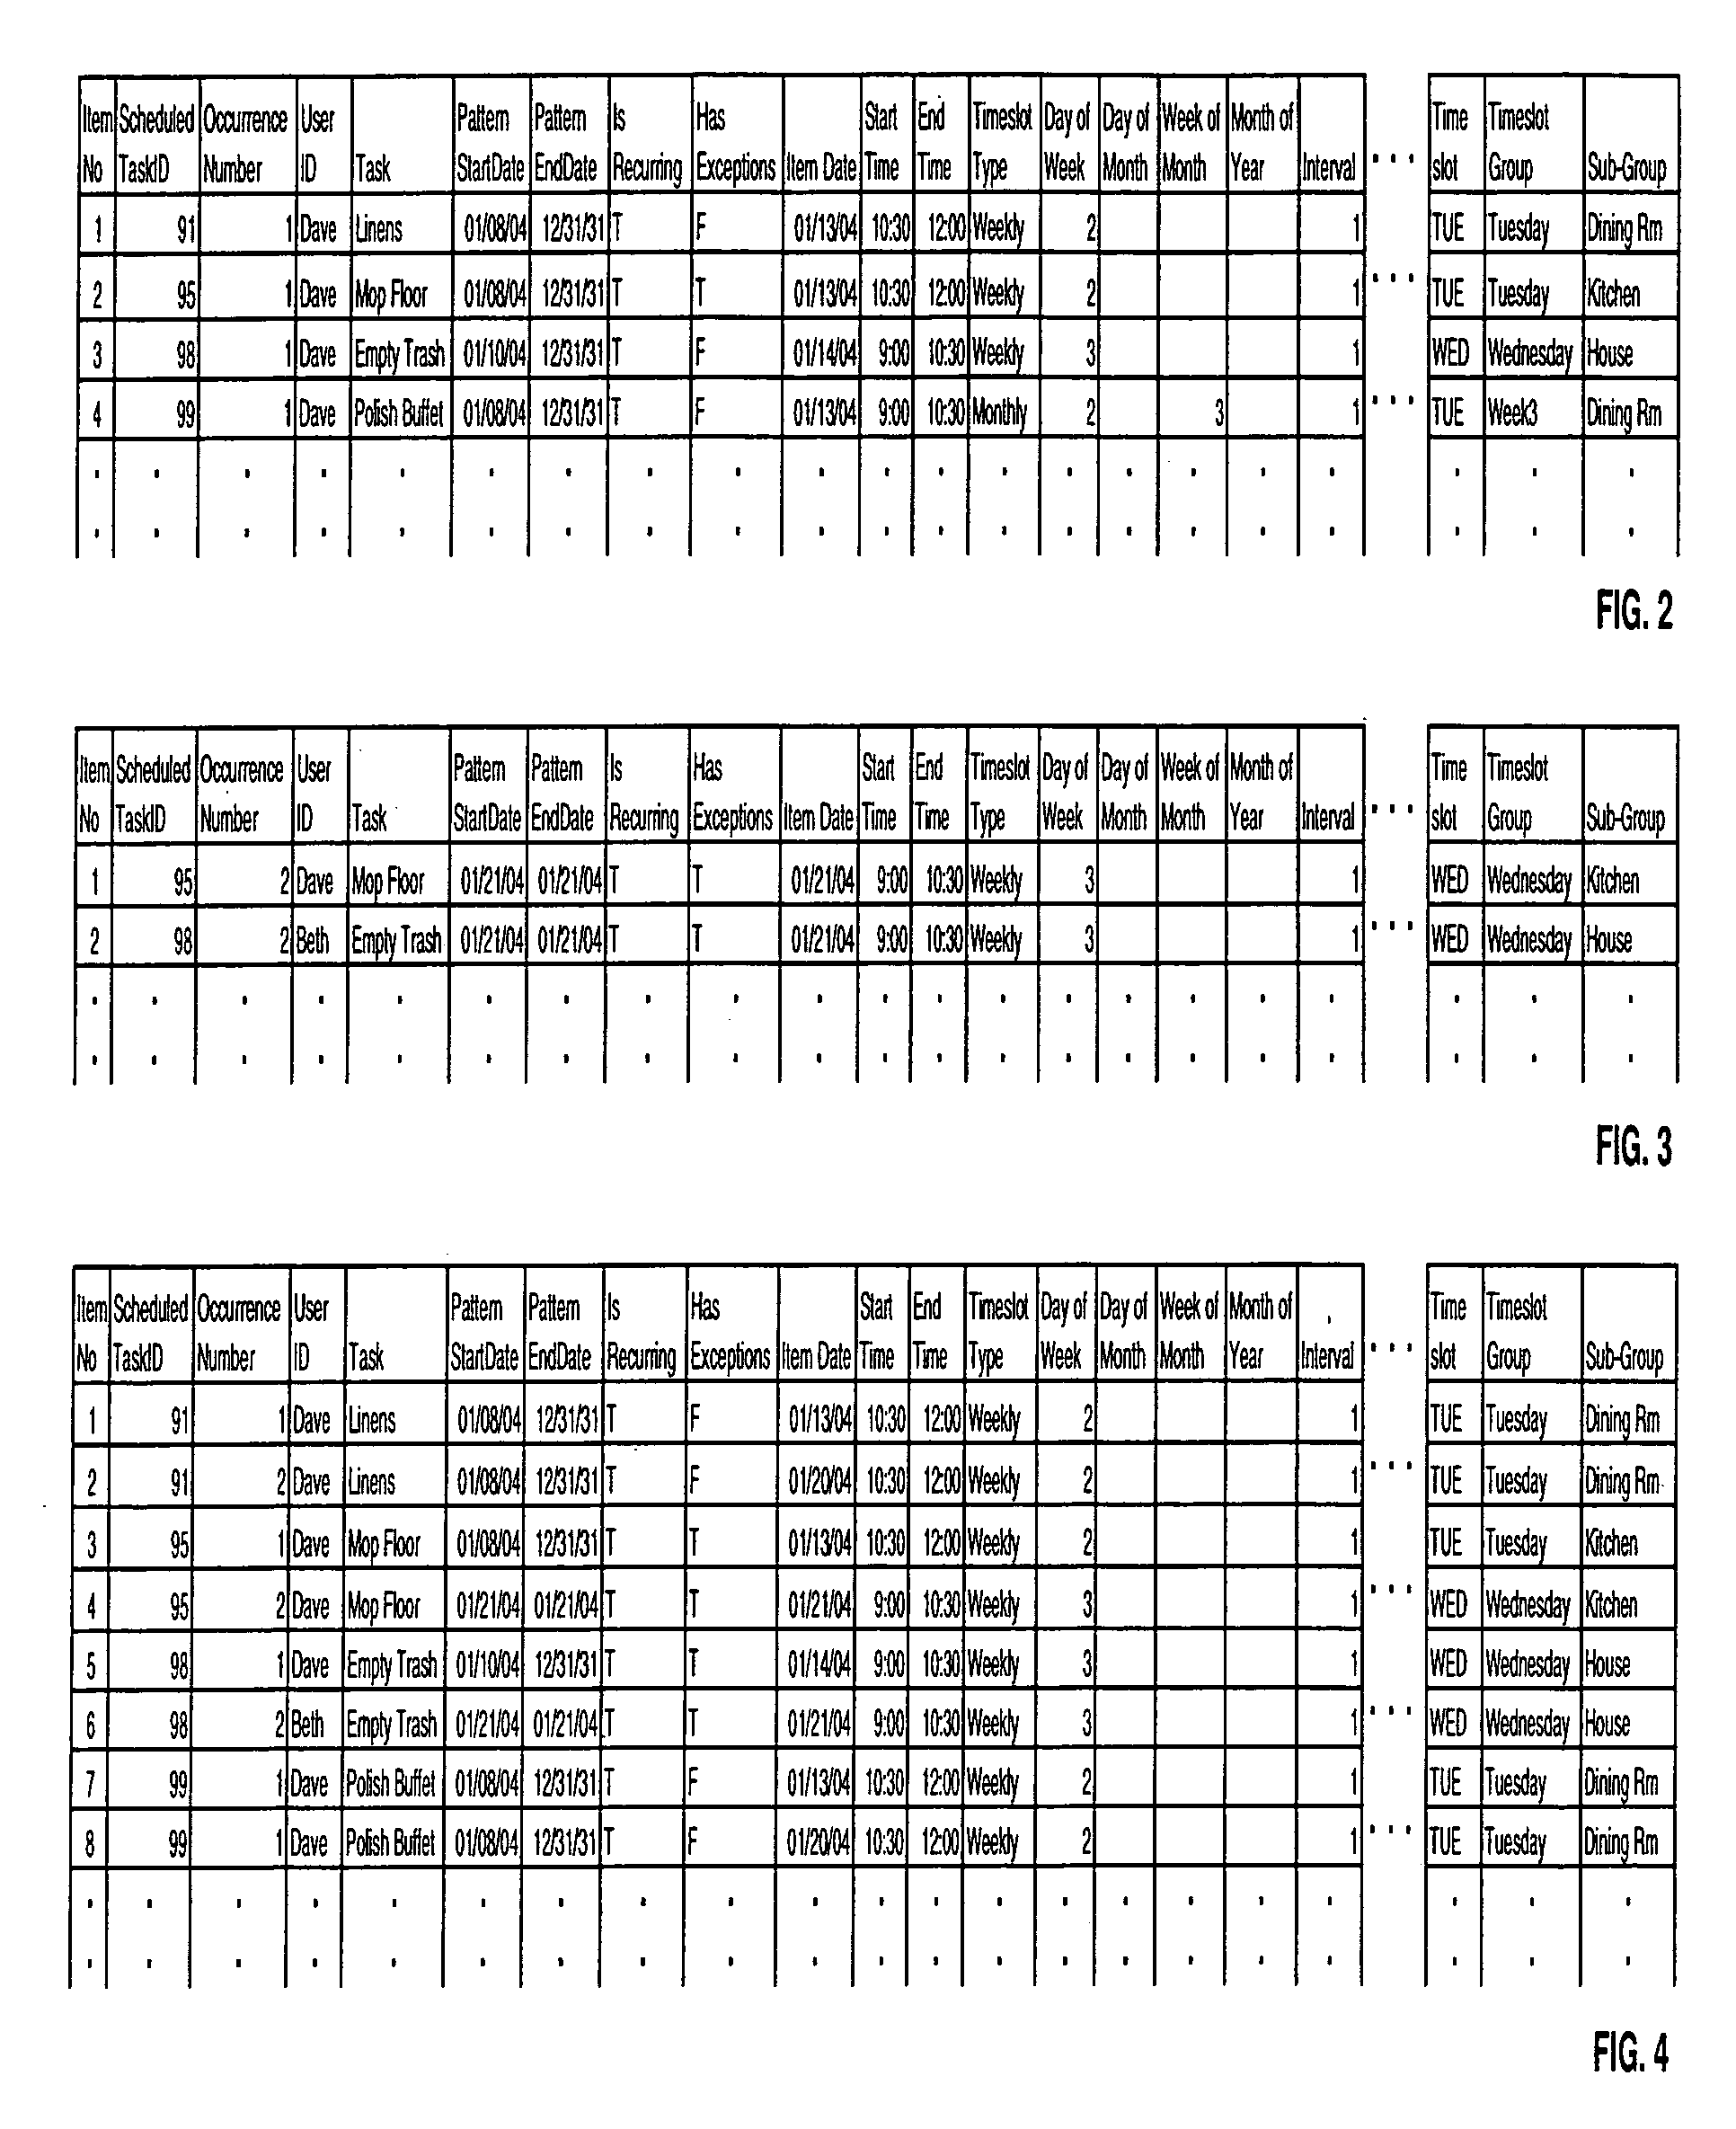 Grouping and displaying multiple tasks within an event object of an electronic calendar